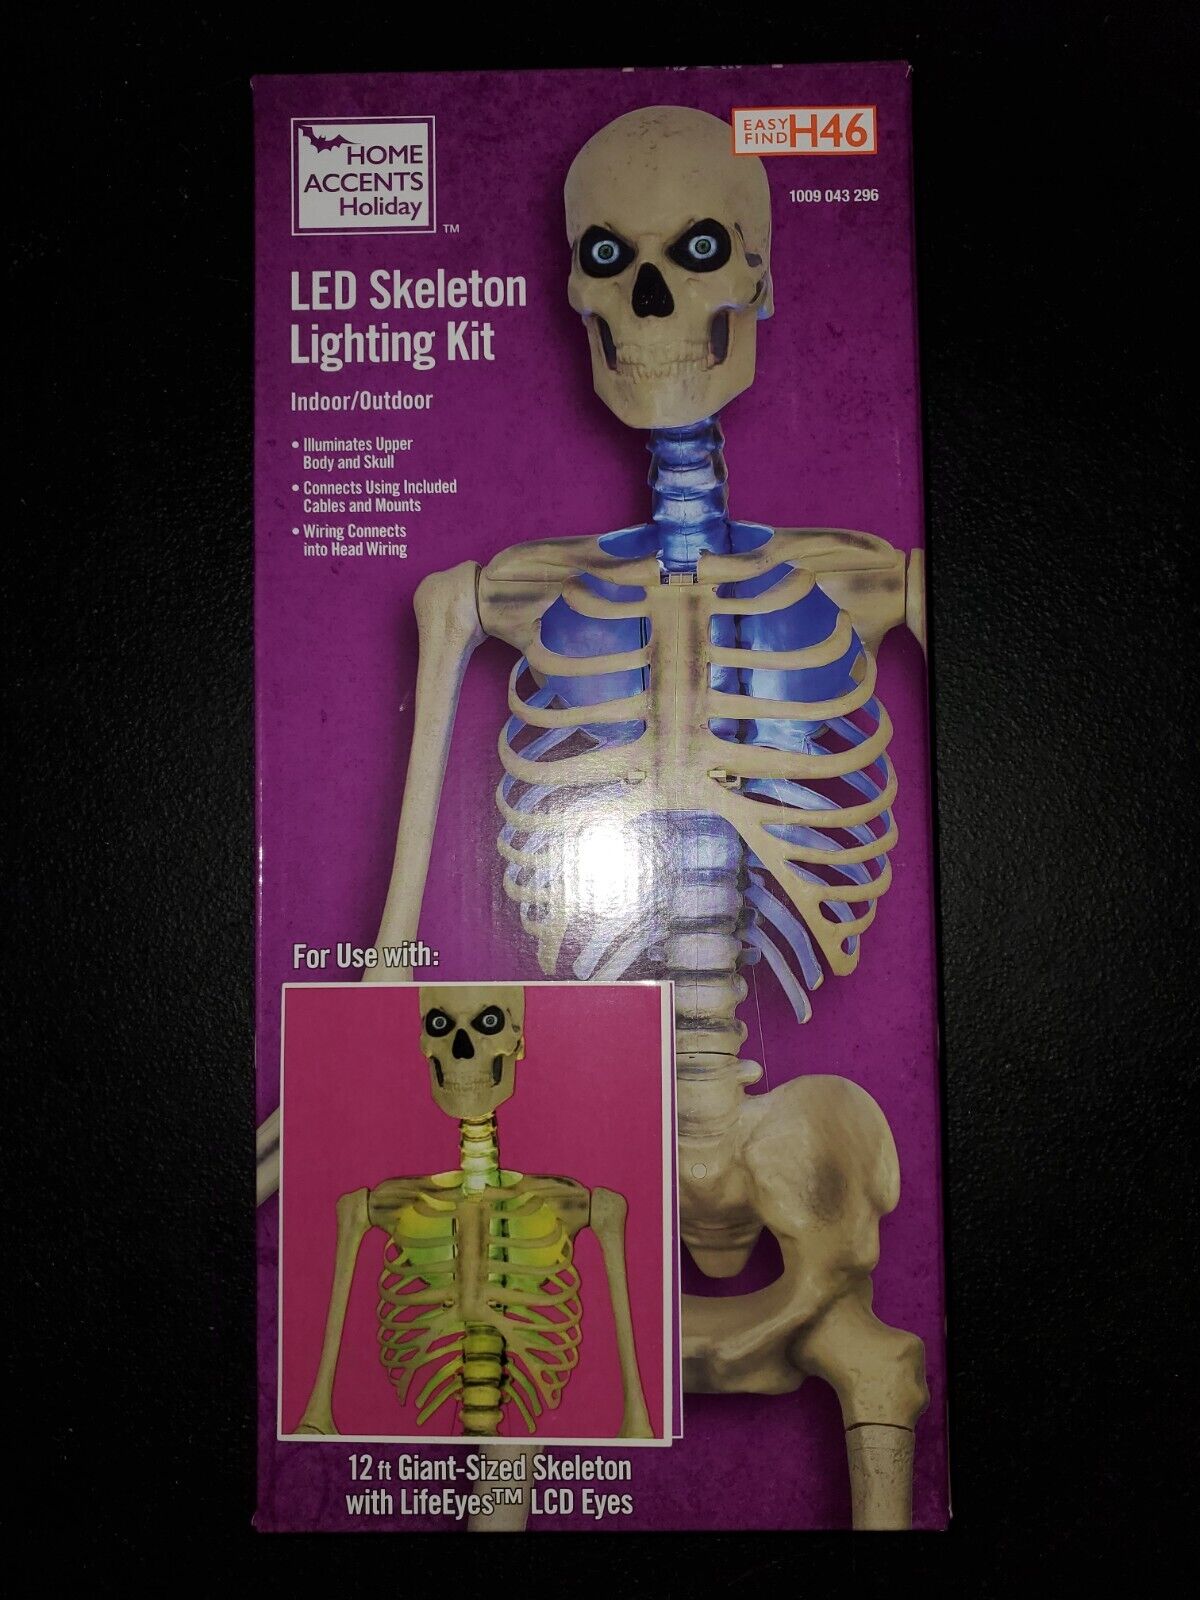 12 Ft Skeleton LED Home Accents Holiday Lighting Kit Home Depot 2023 NEW